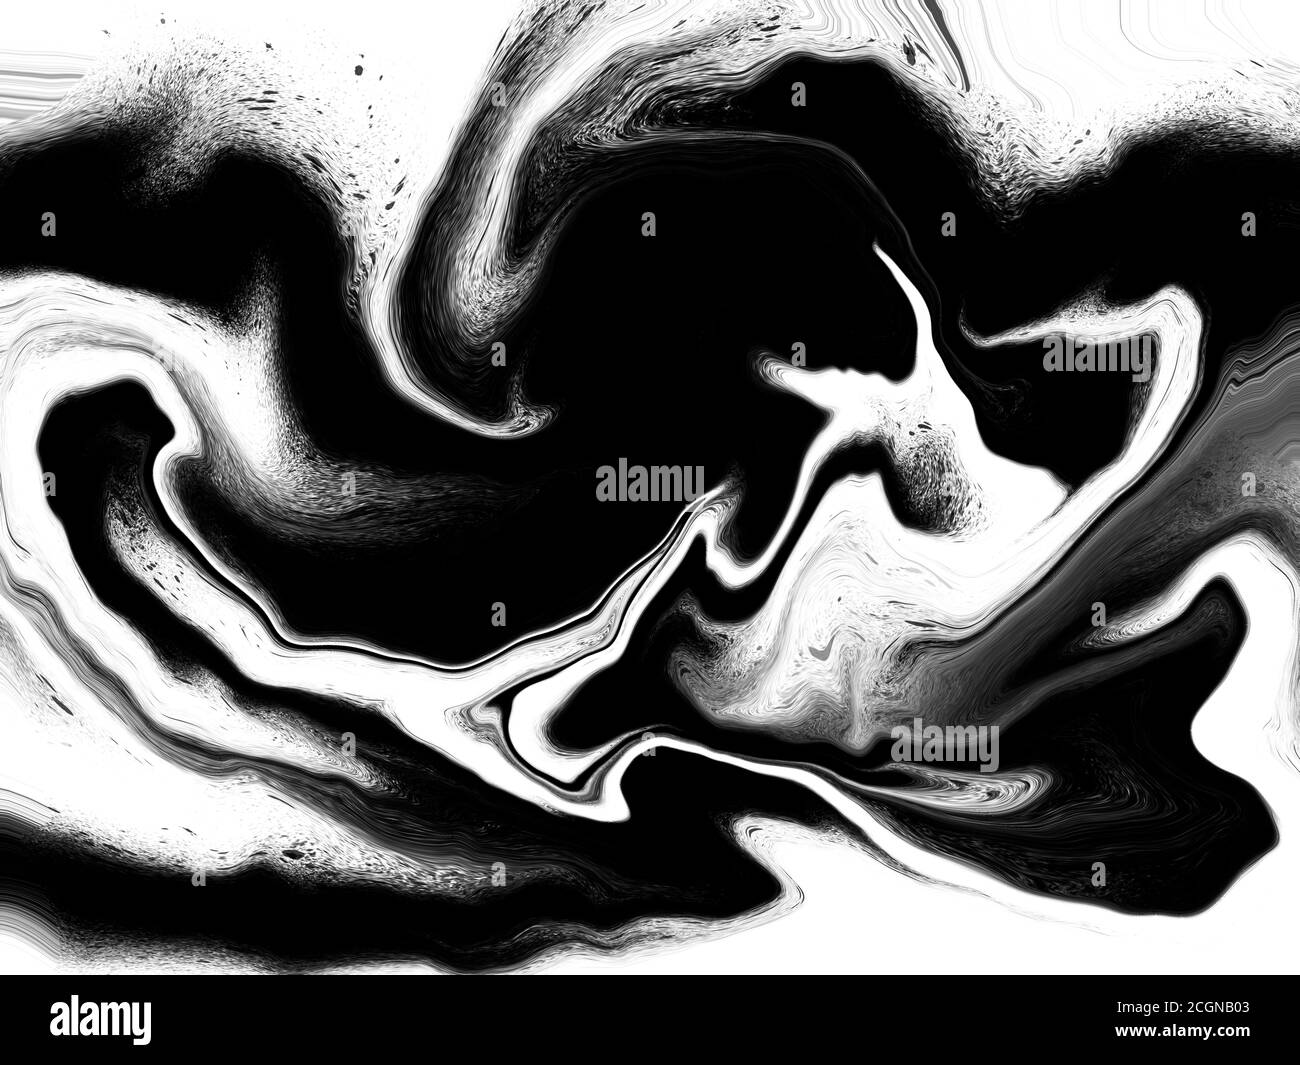 https://c8.alamy.com/comp/2CGNB03/abstract-black-and-white-marble-ink-drawing-background-high-resolution-jpg-file-perfect-for-your-projects-2CGNB03.jpg